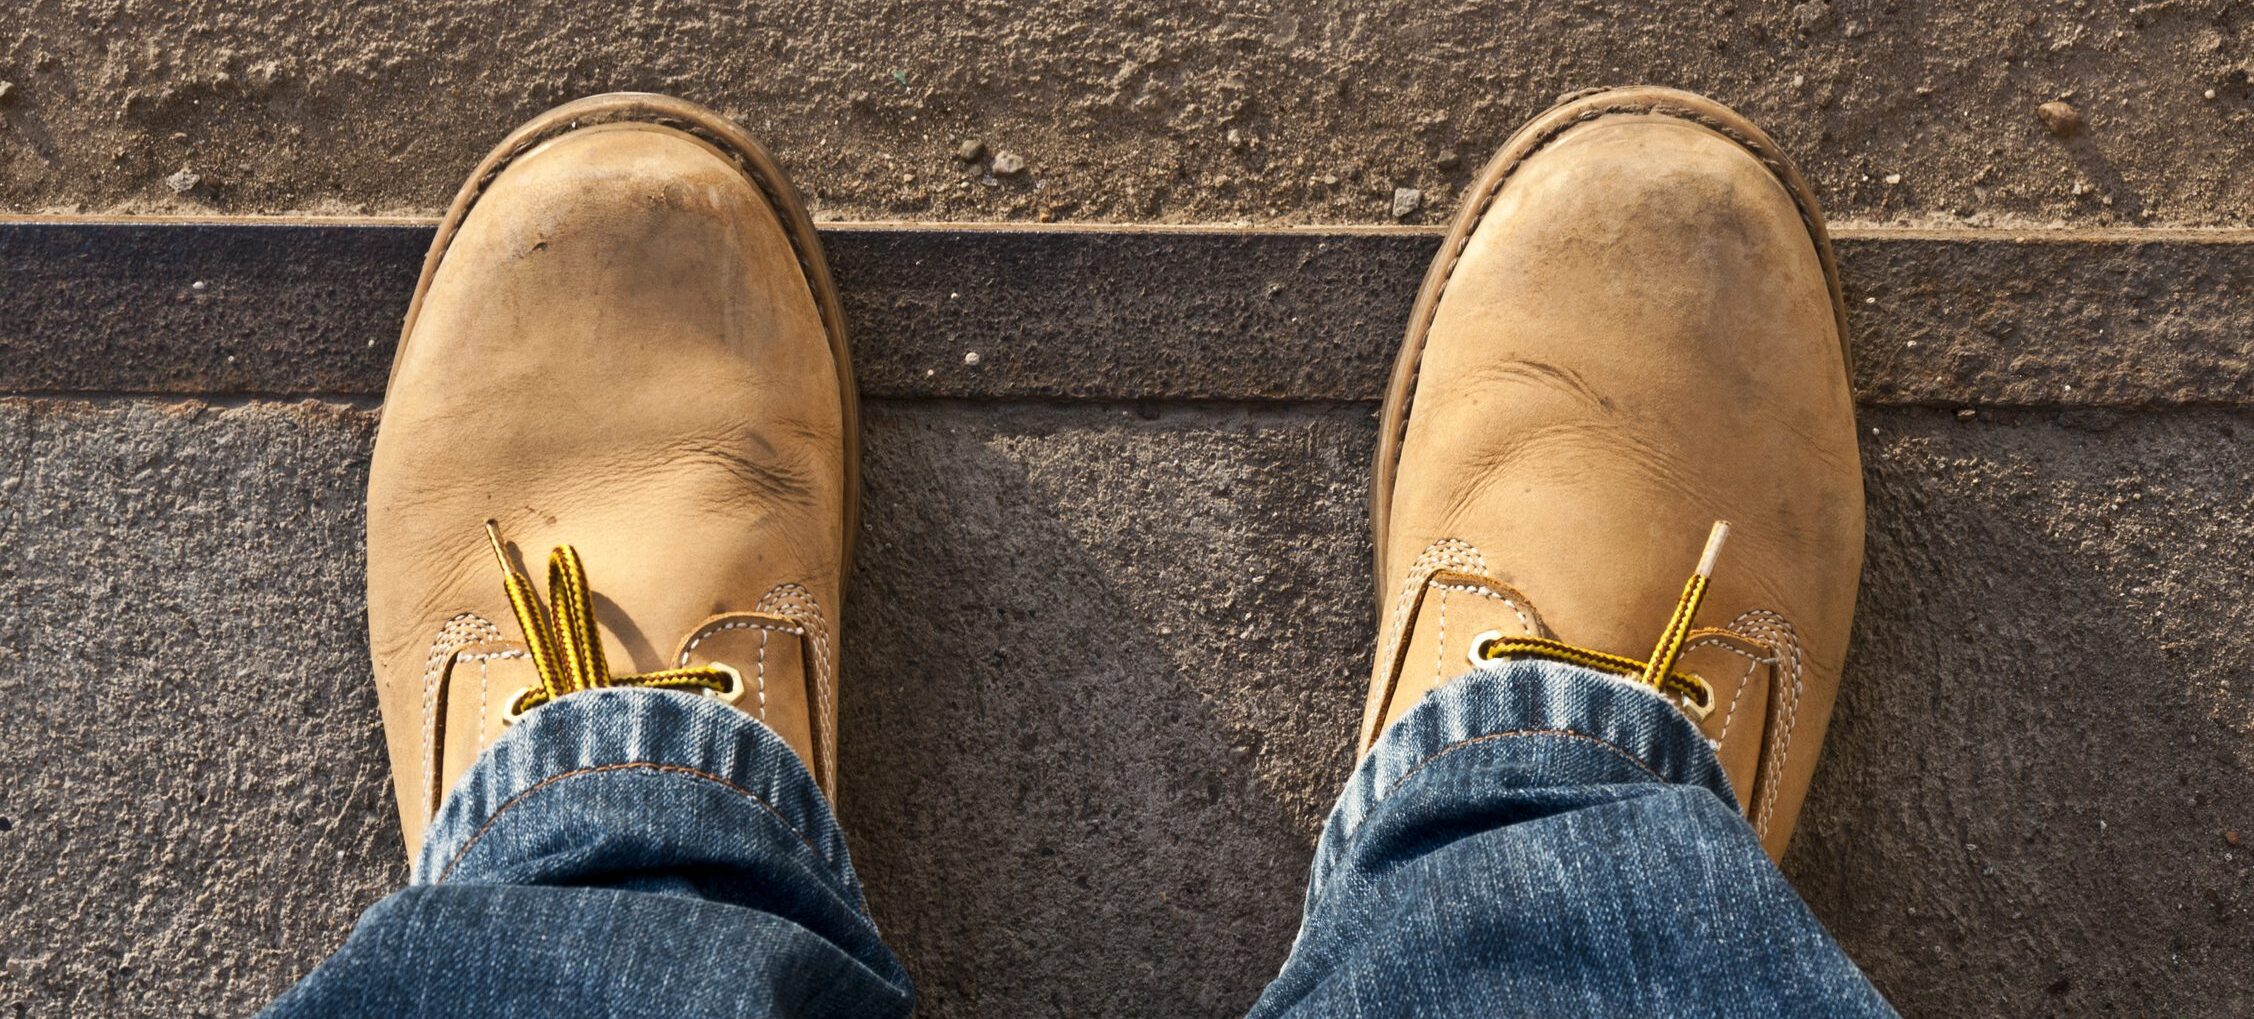 Yellow work boots from the bird's eye perspective.